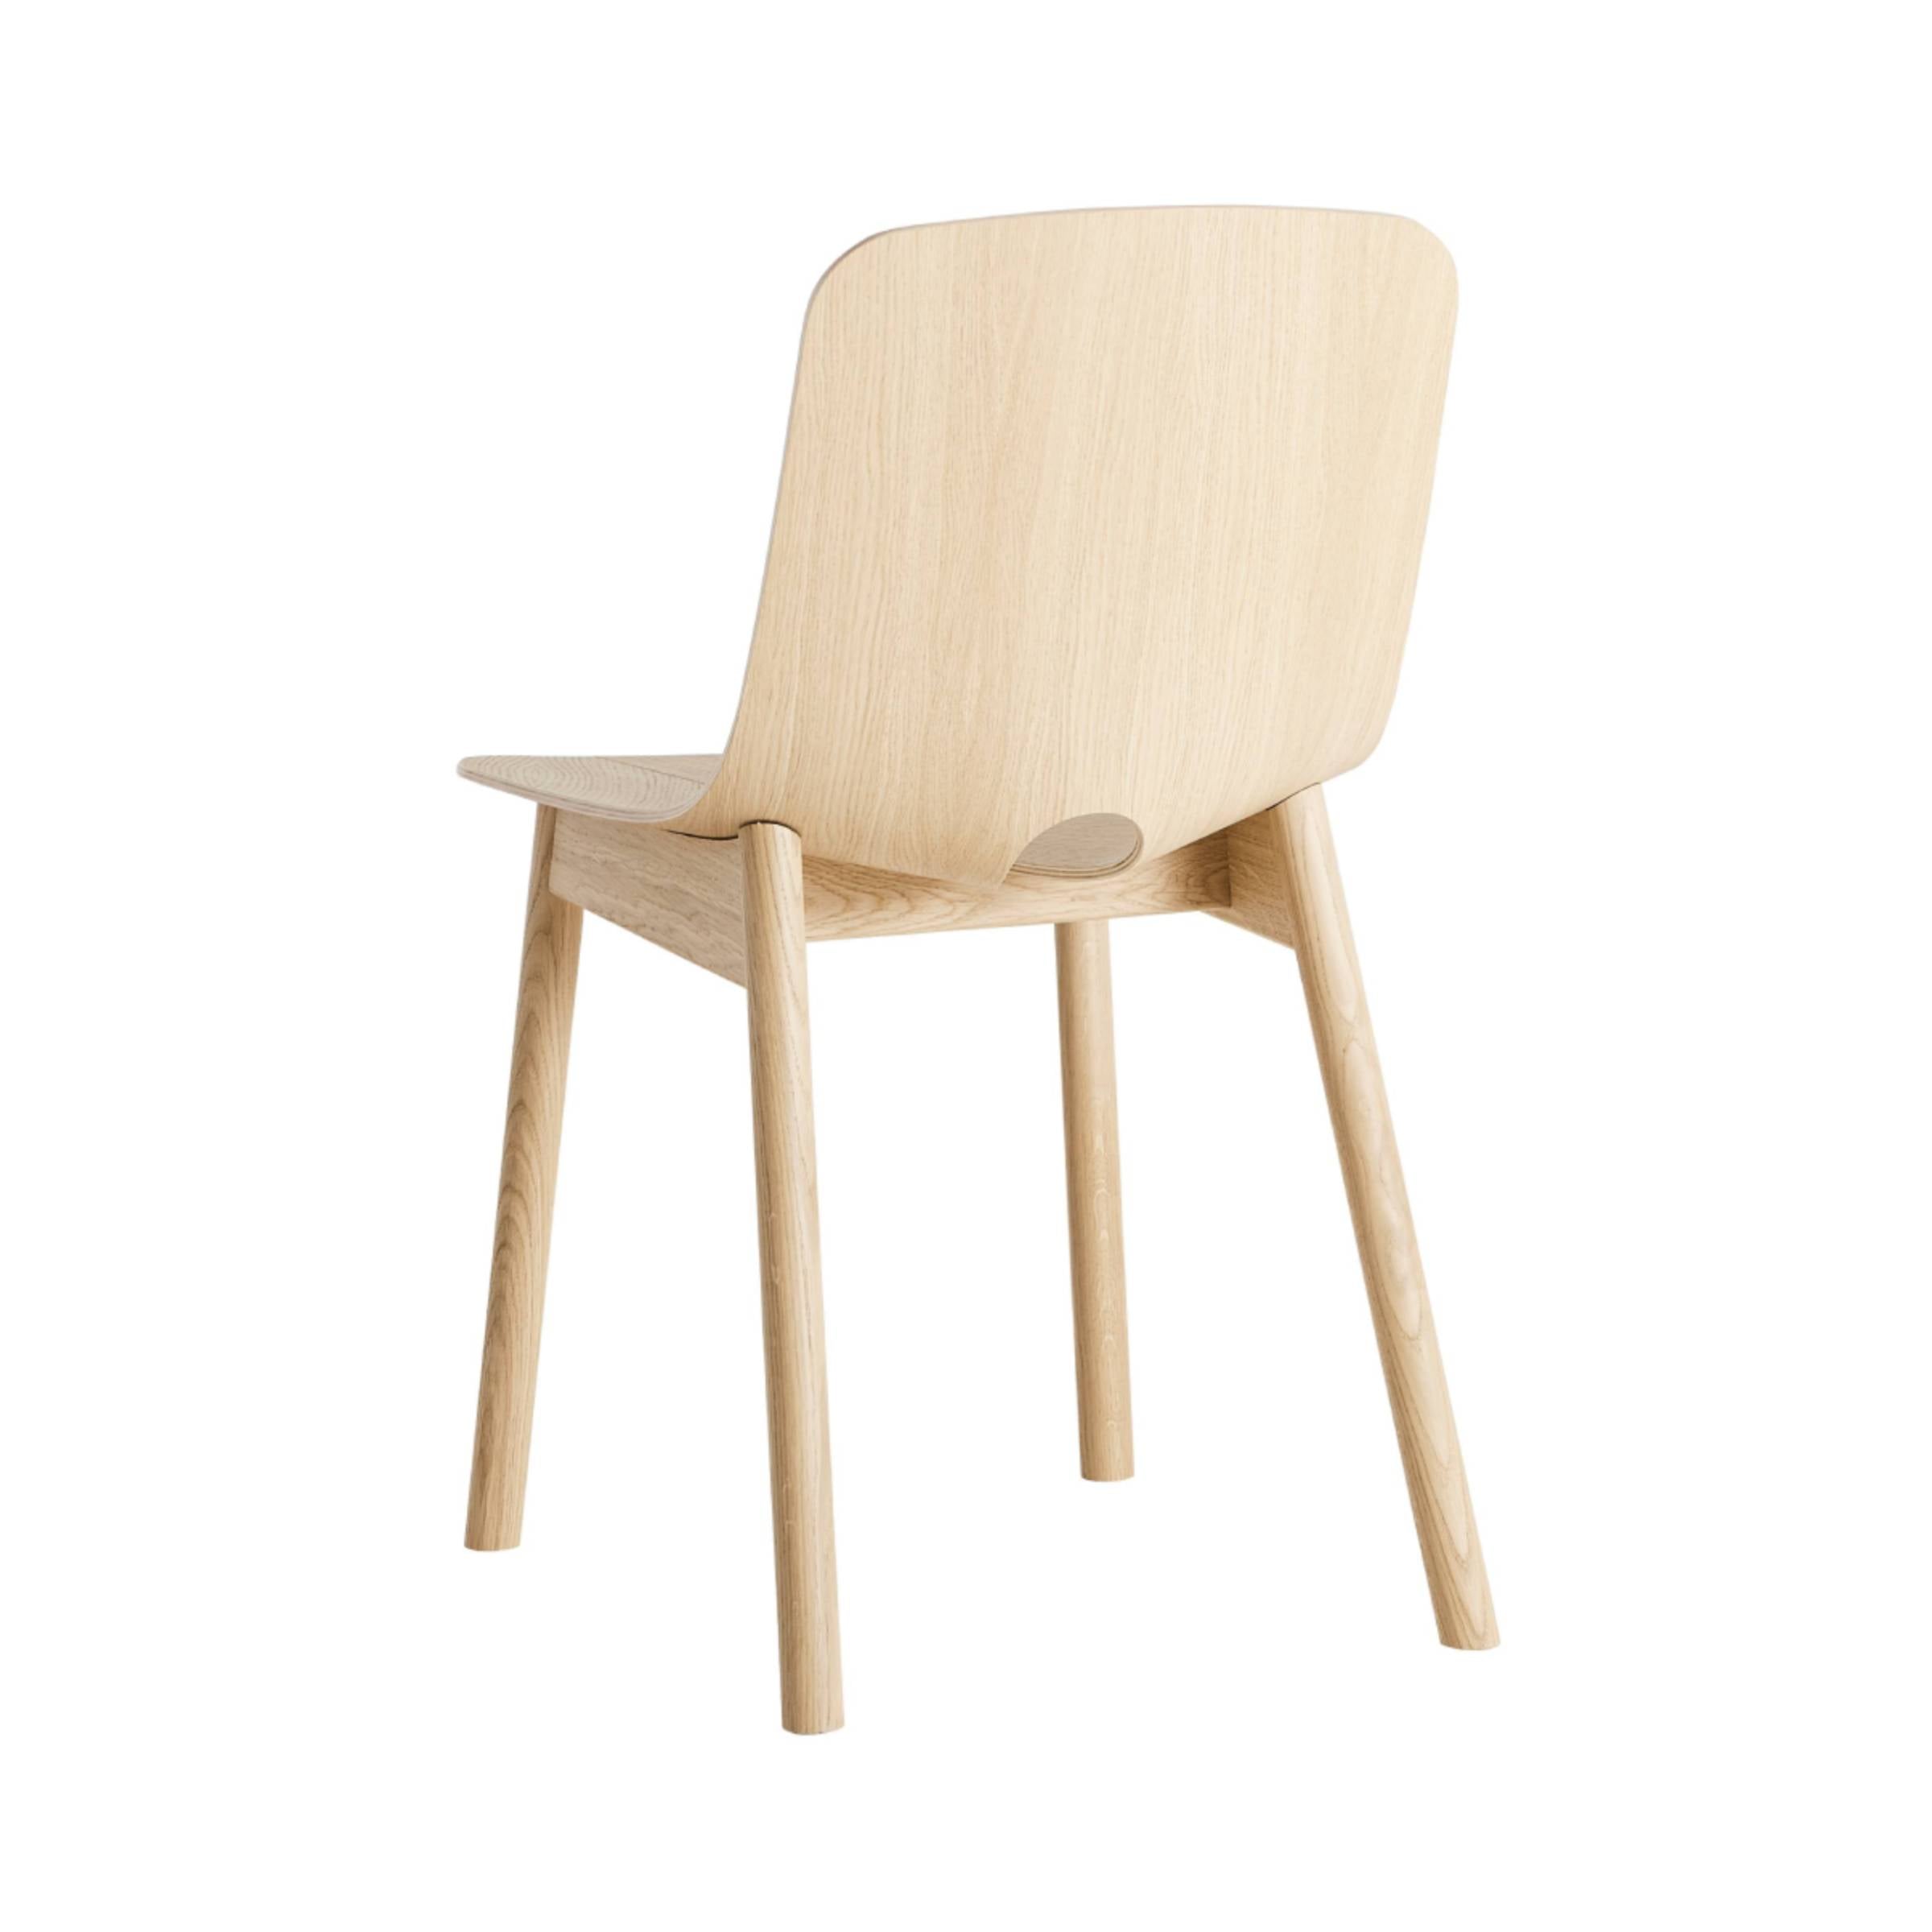 Mono Dining Chair: Set of 2